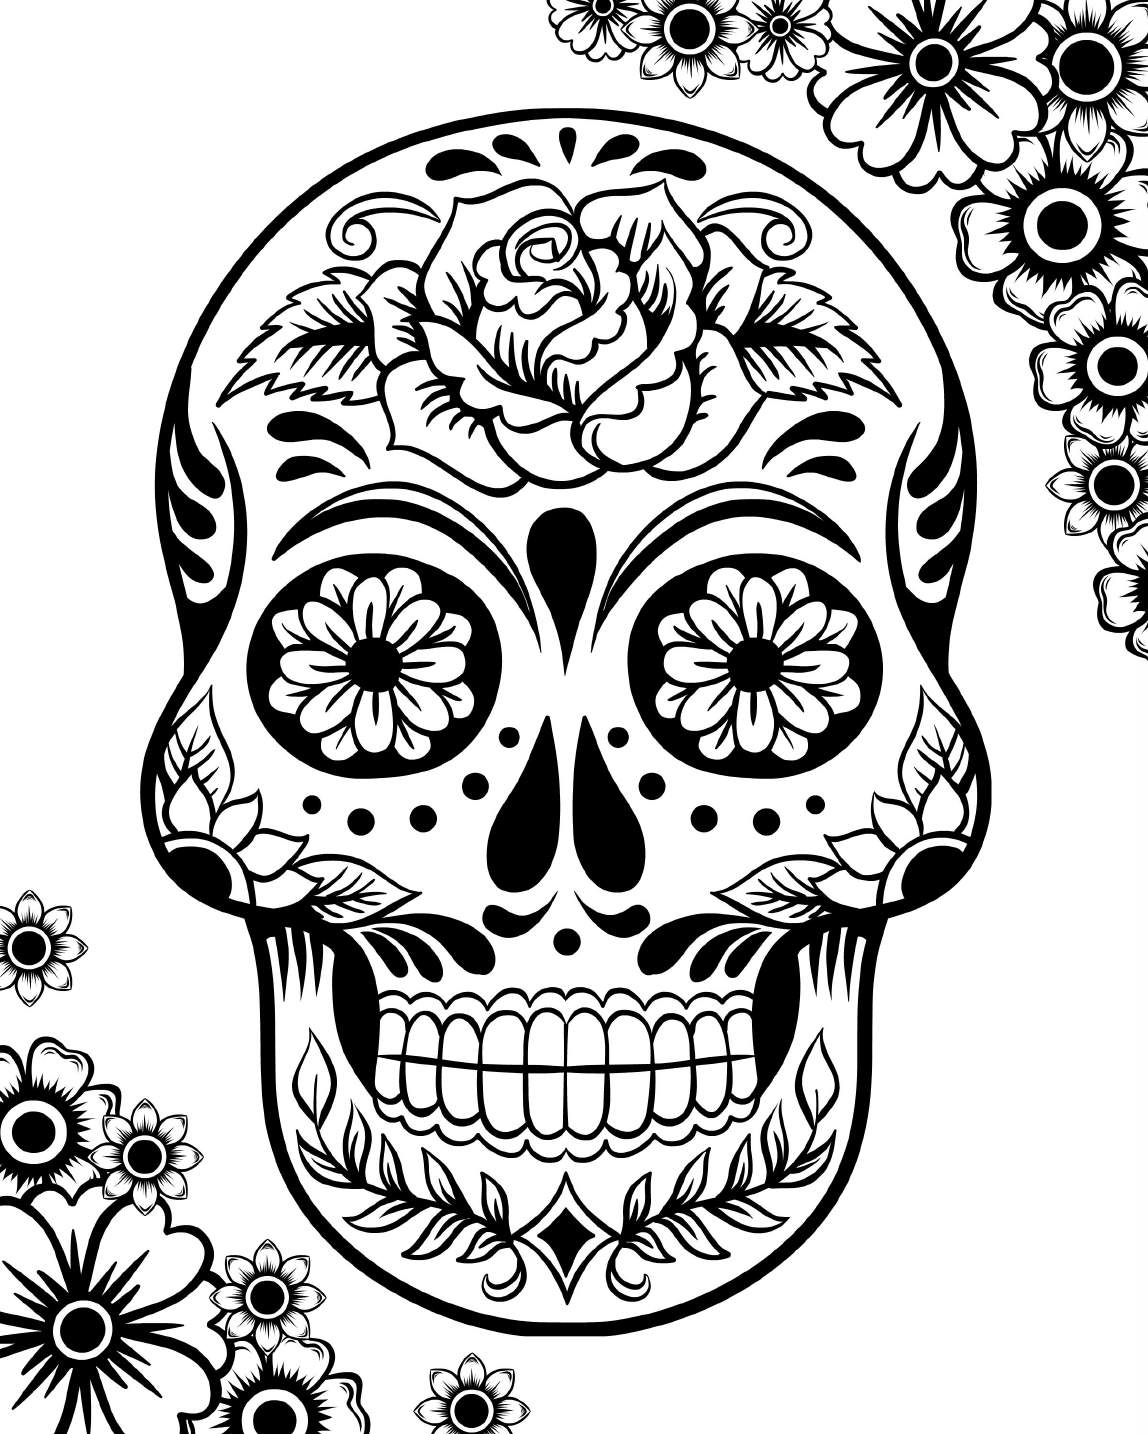 Download Free Printable Day of the Dead Coloring Pages - Best ...